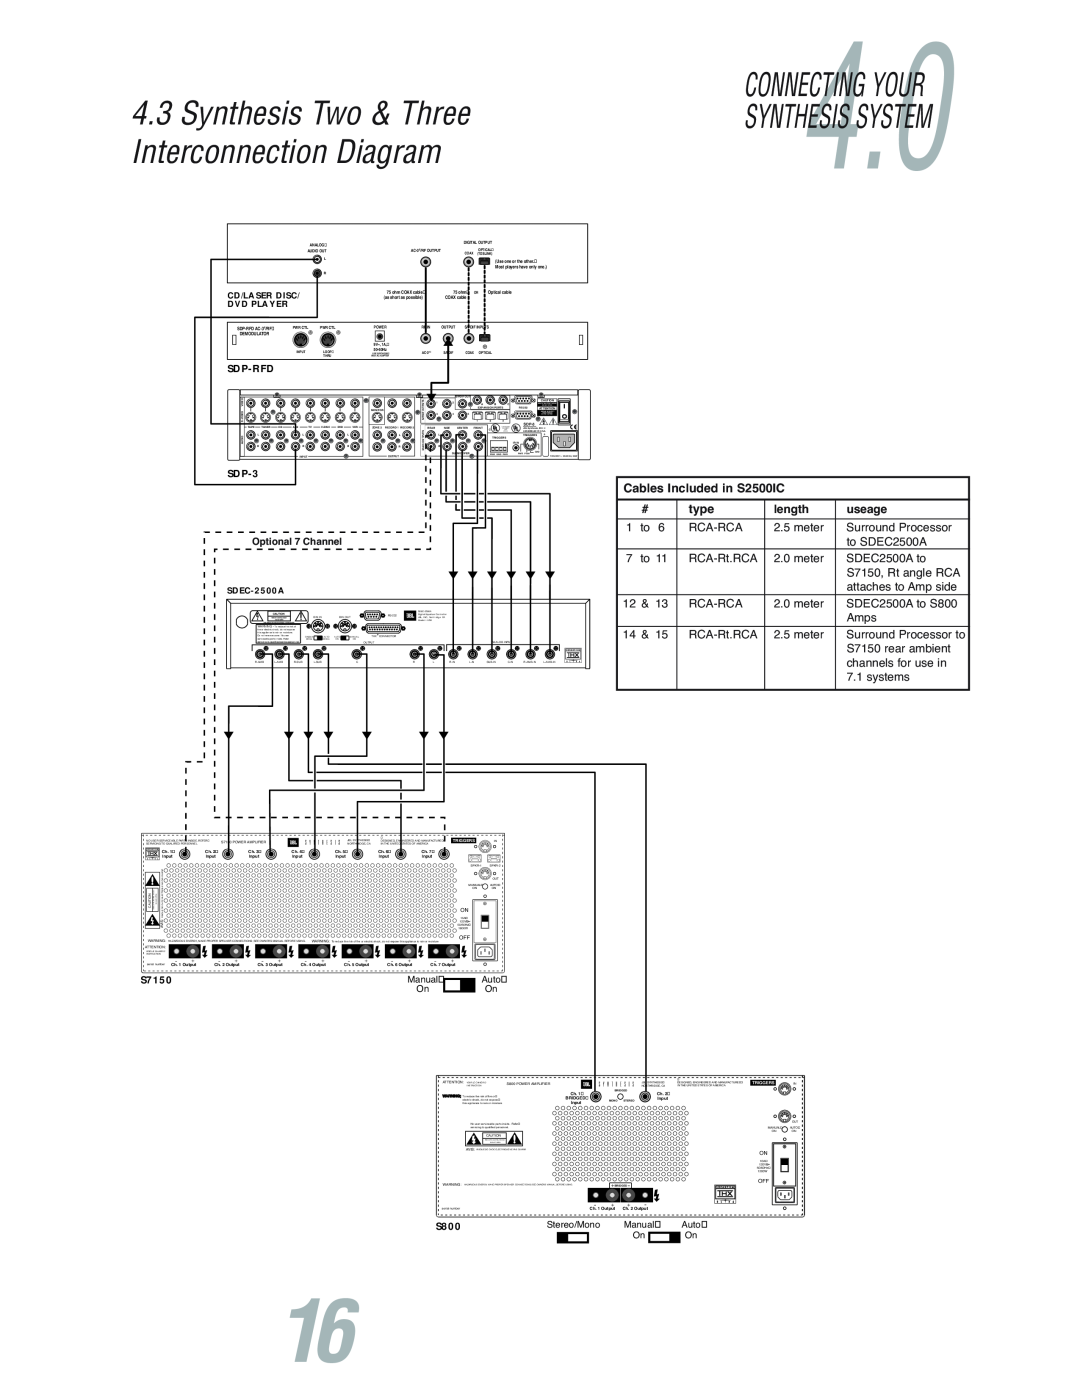 JBL S7150 user manual 4.3Synthesis Two & Three Interconnection Diagram, Cables Included in S2500IC, type, length, useage 